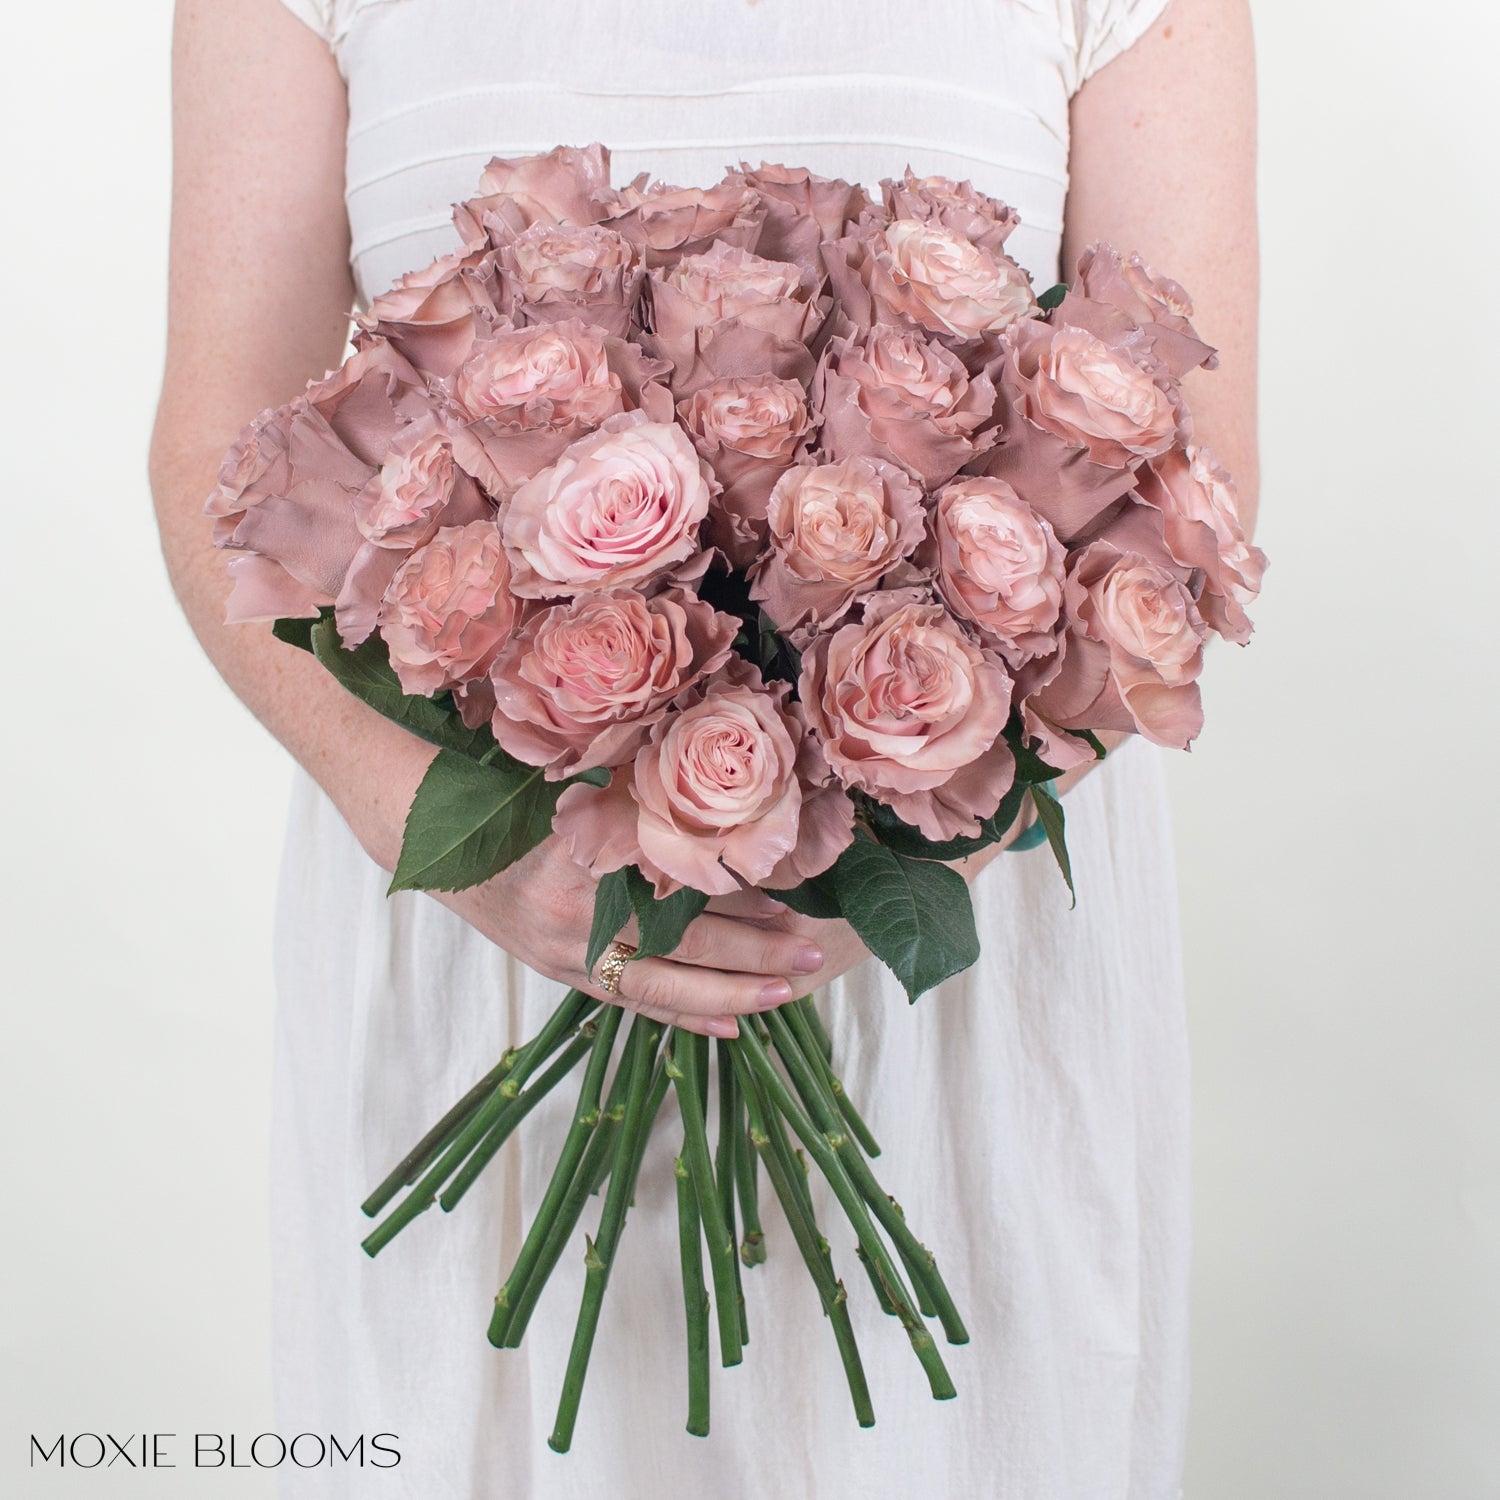 Painted and Dyed Pink Pearl Novelty Rose